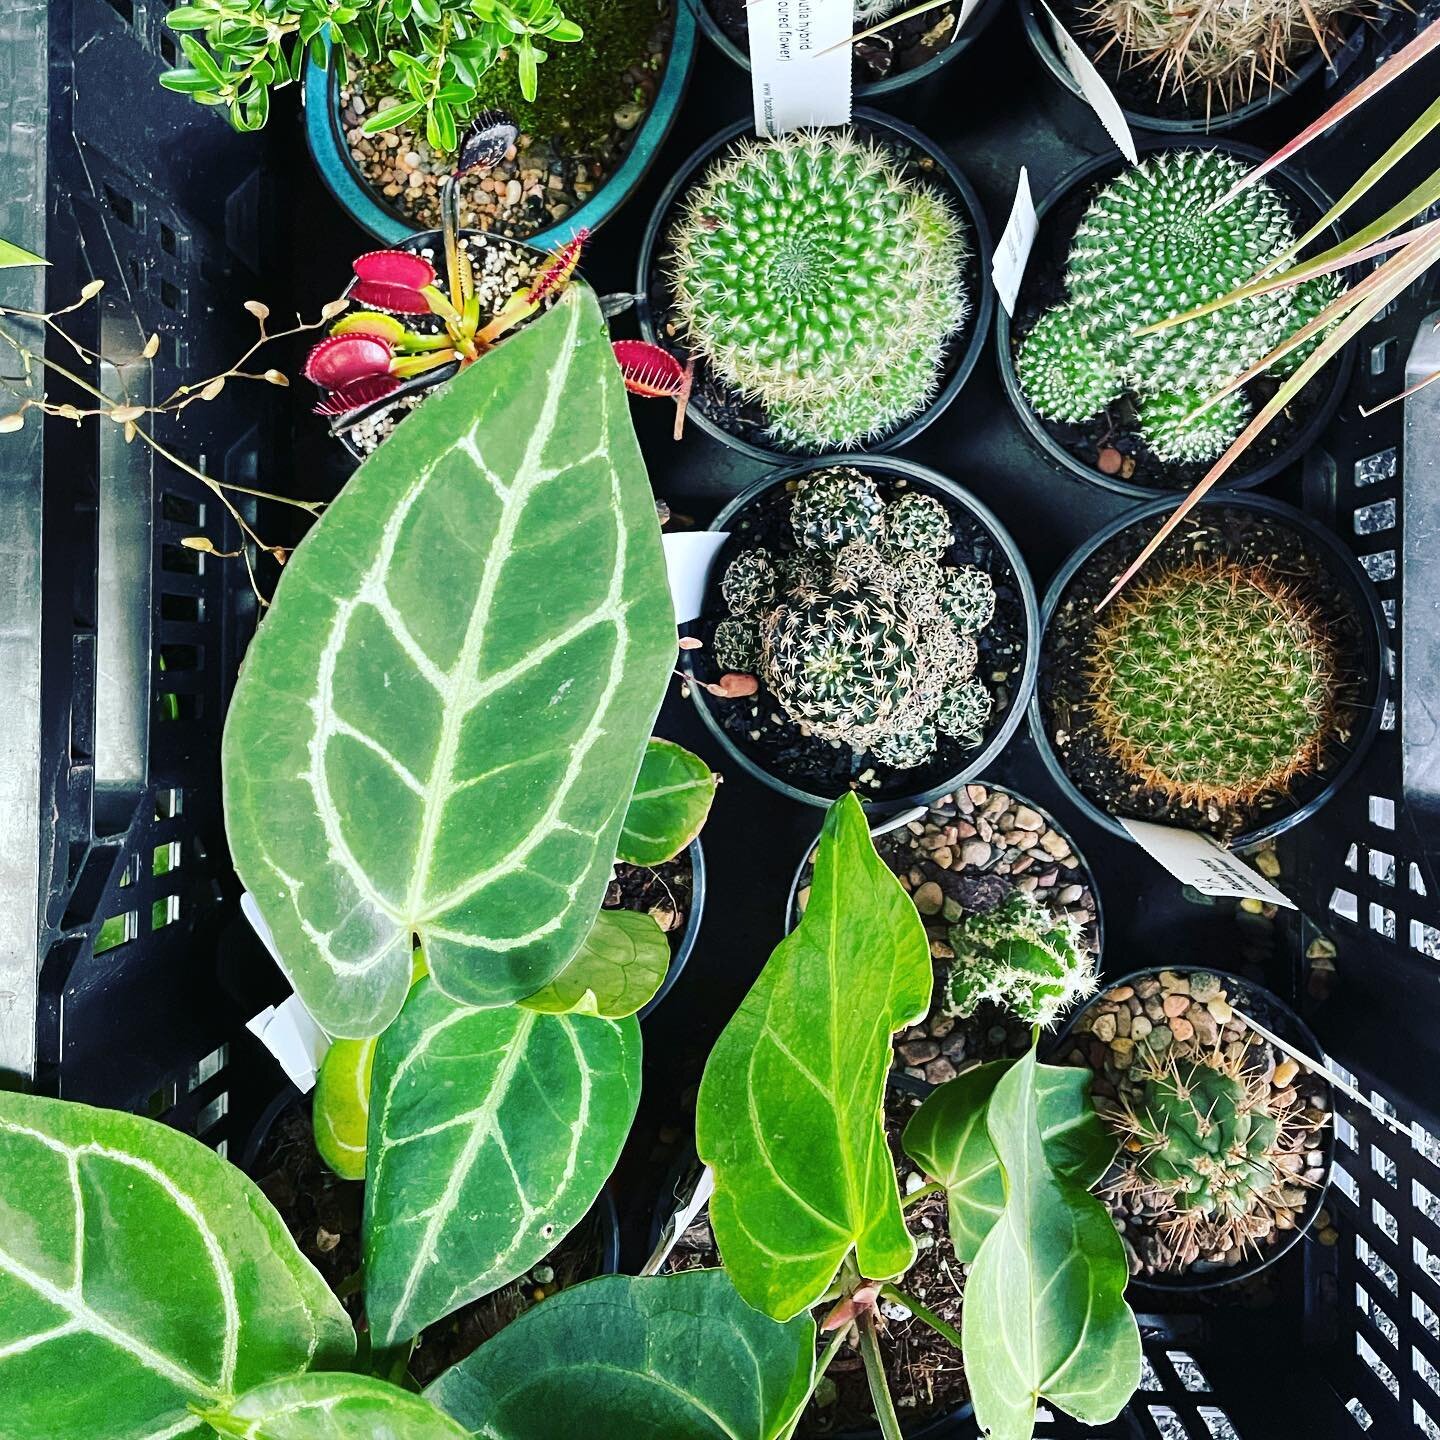 Show us your 2022 plant haul by tagging us and #collectorsplanthaul. We&rsquo;d love to see what ticked your fancy.